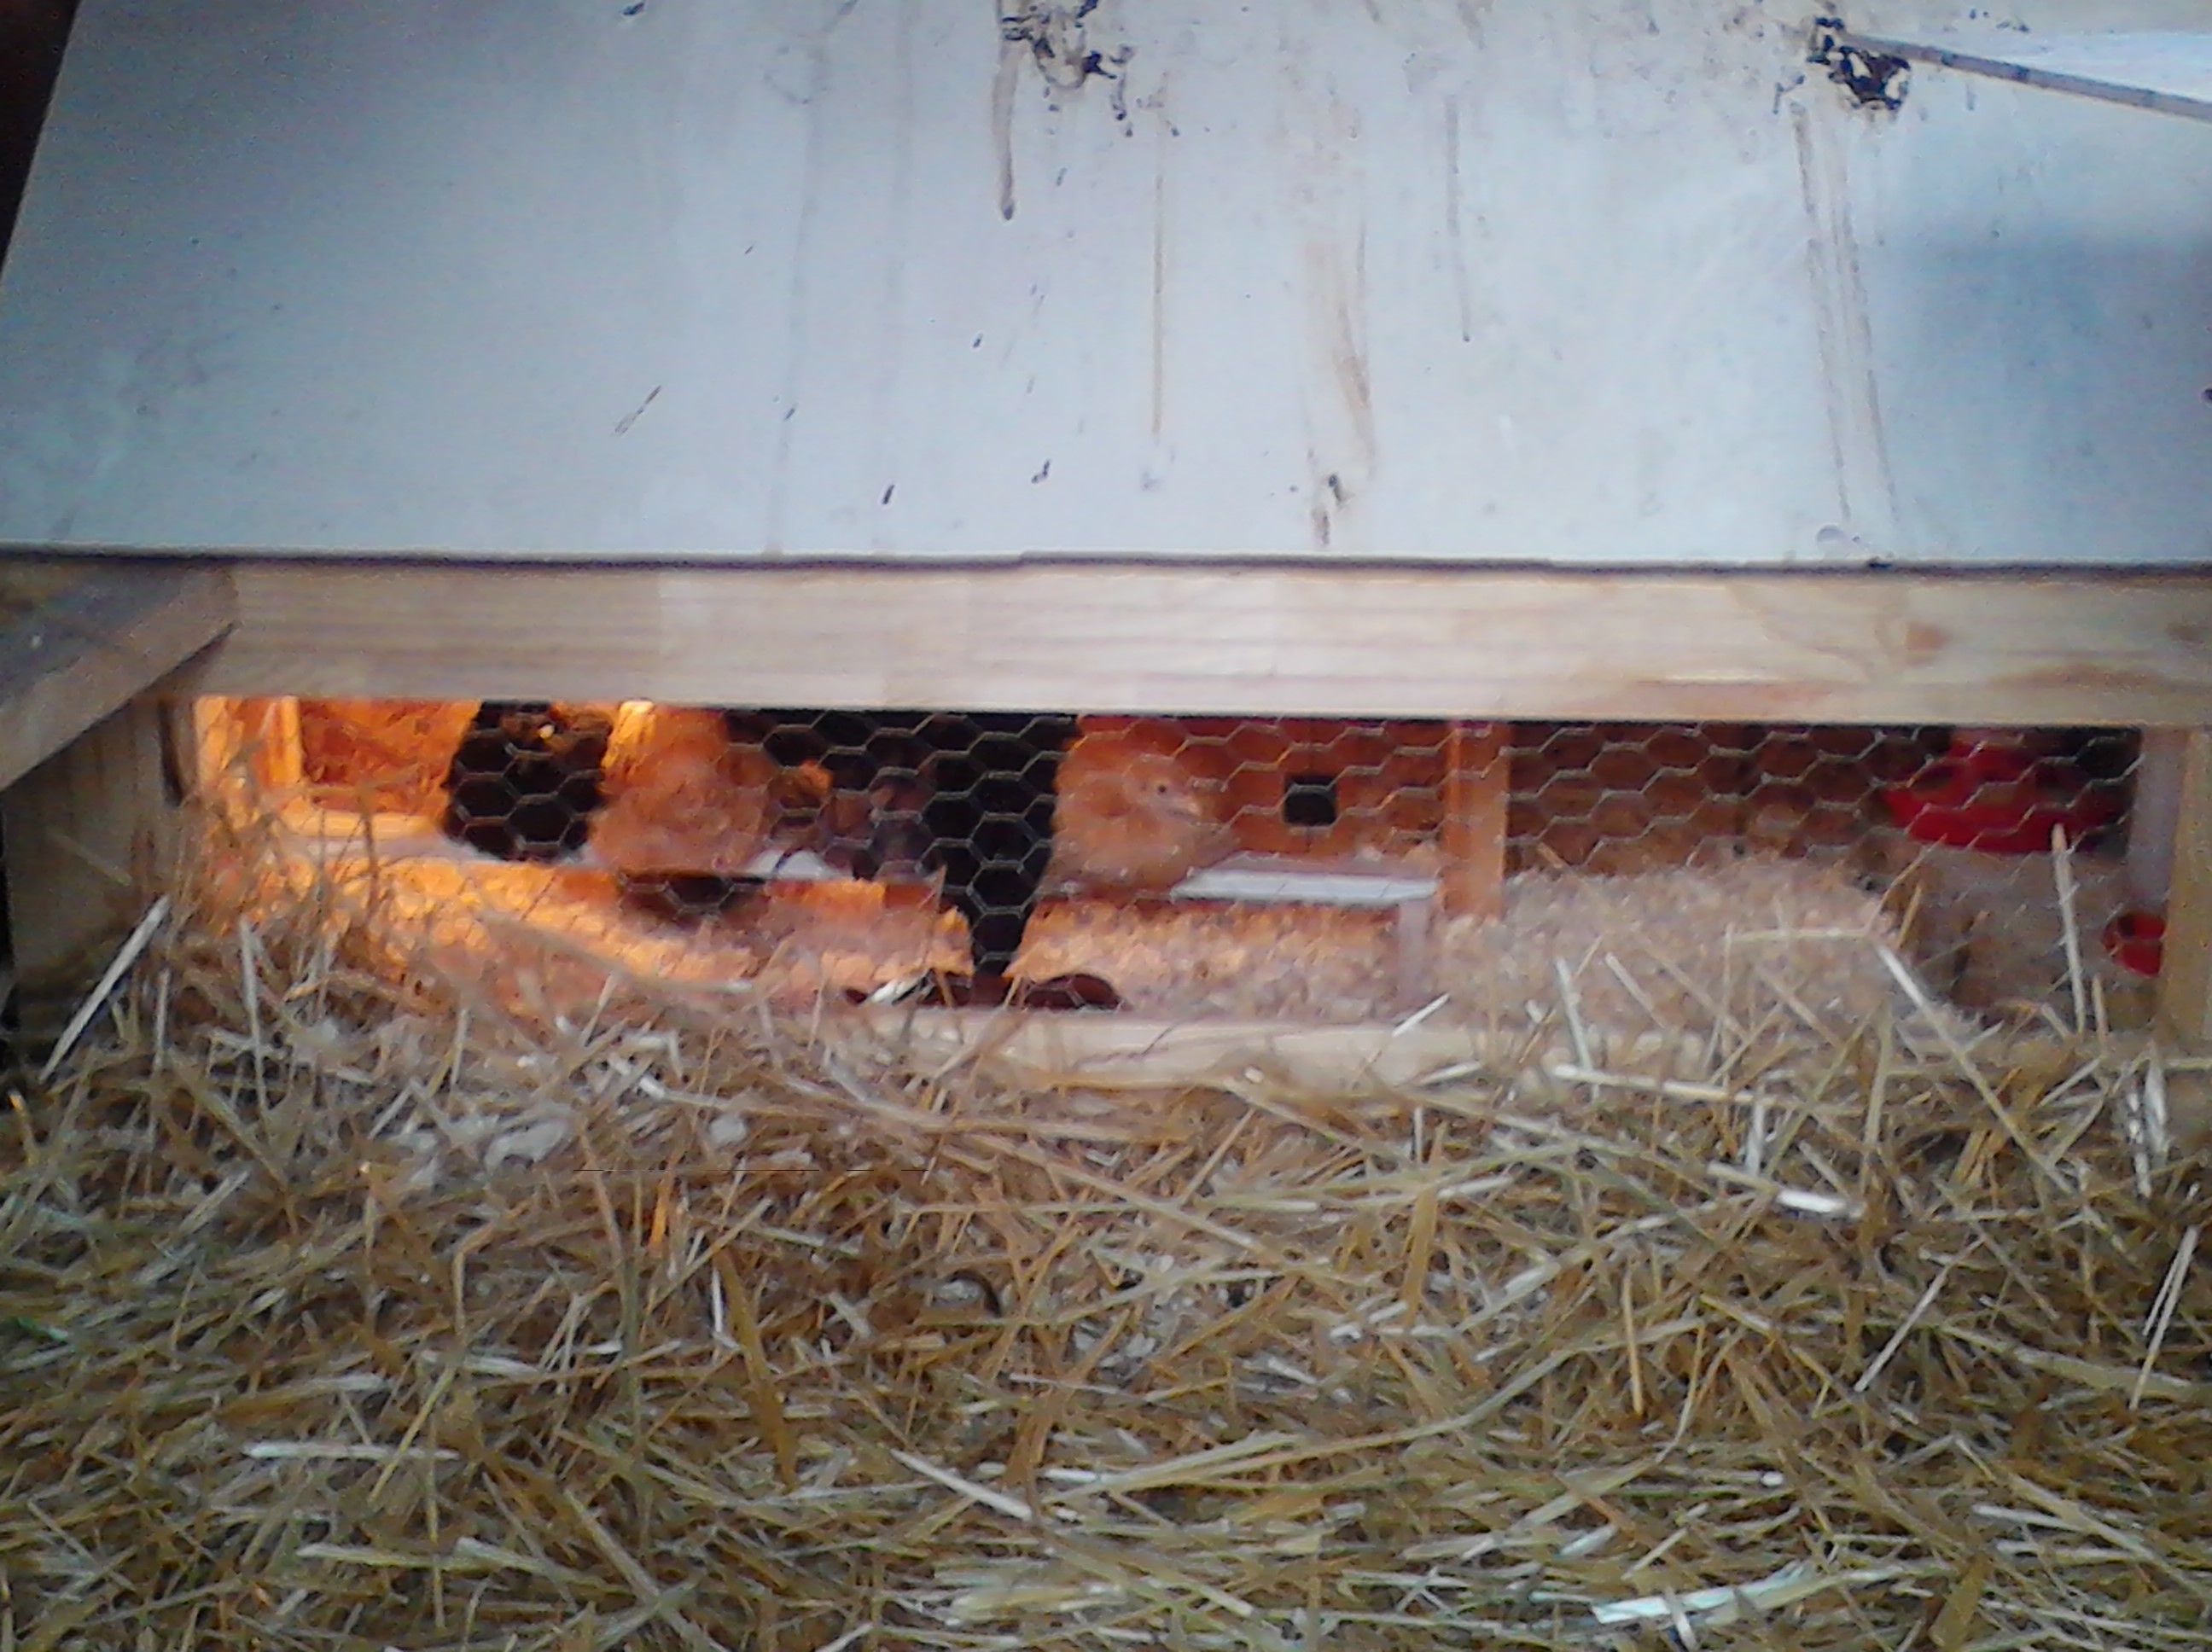 yep those are the new girls in the brooder